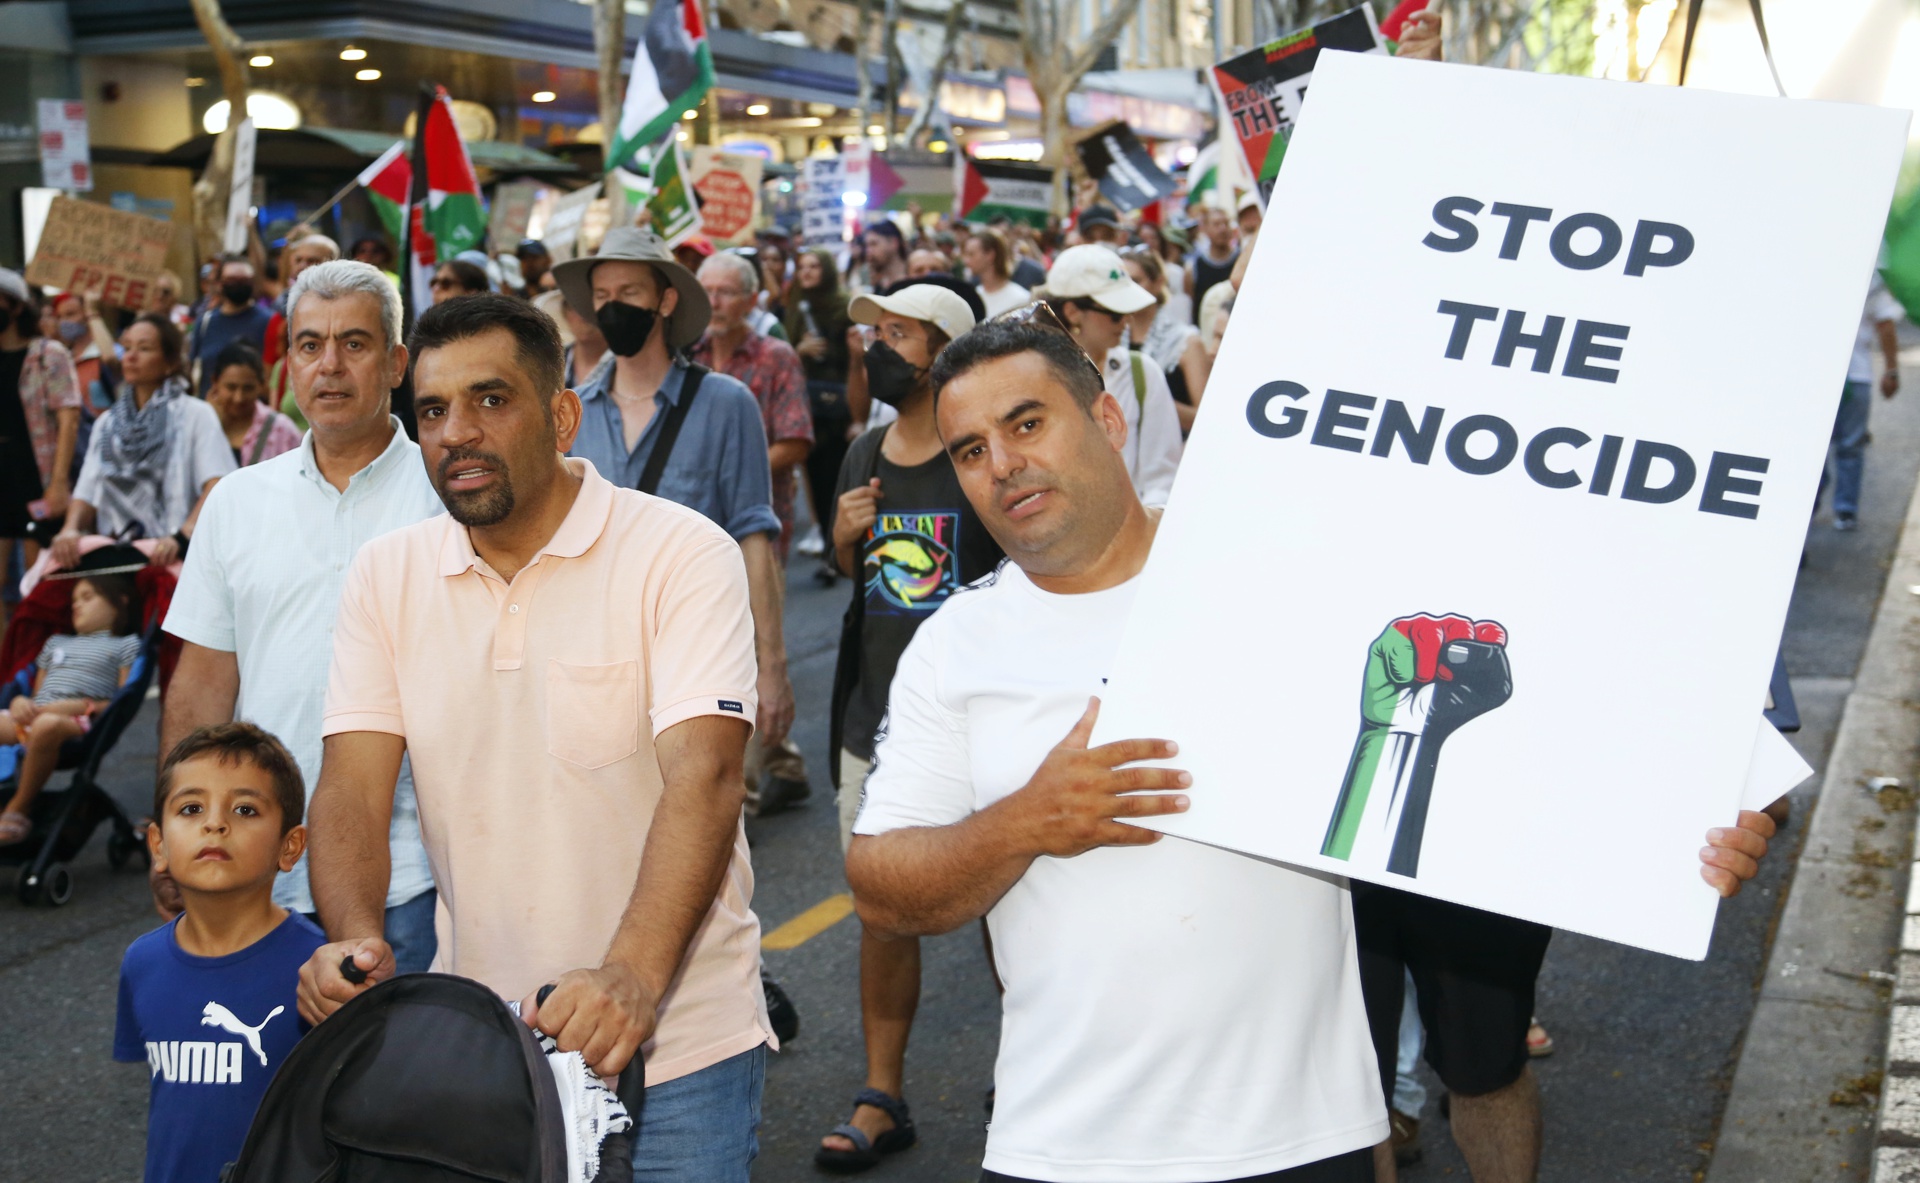 Stop the genocide